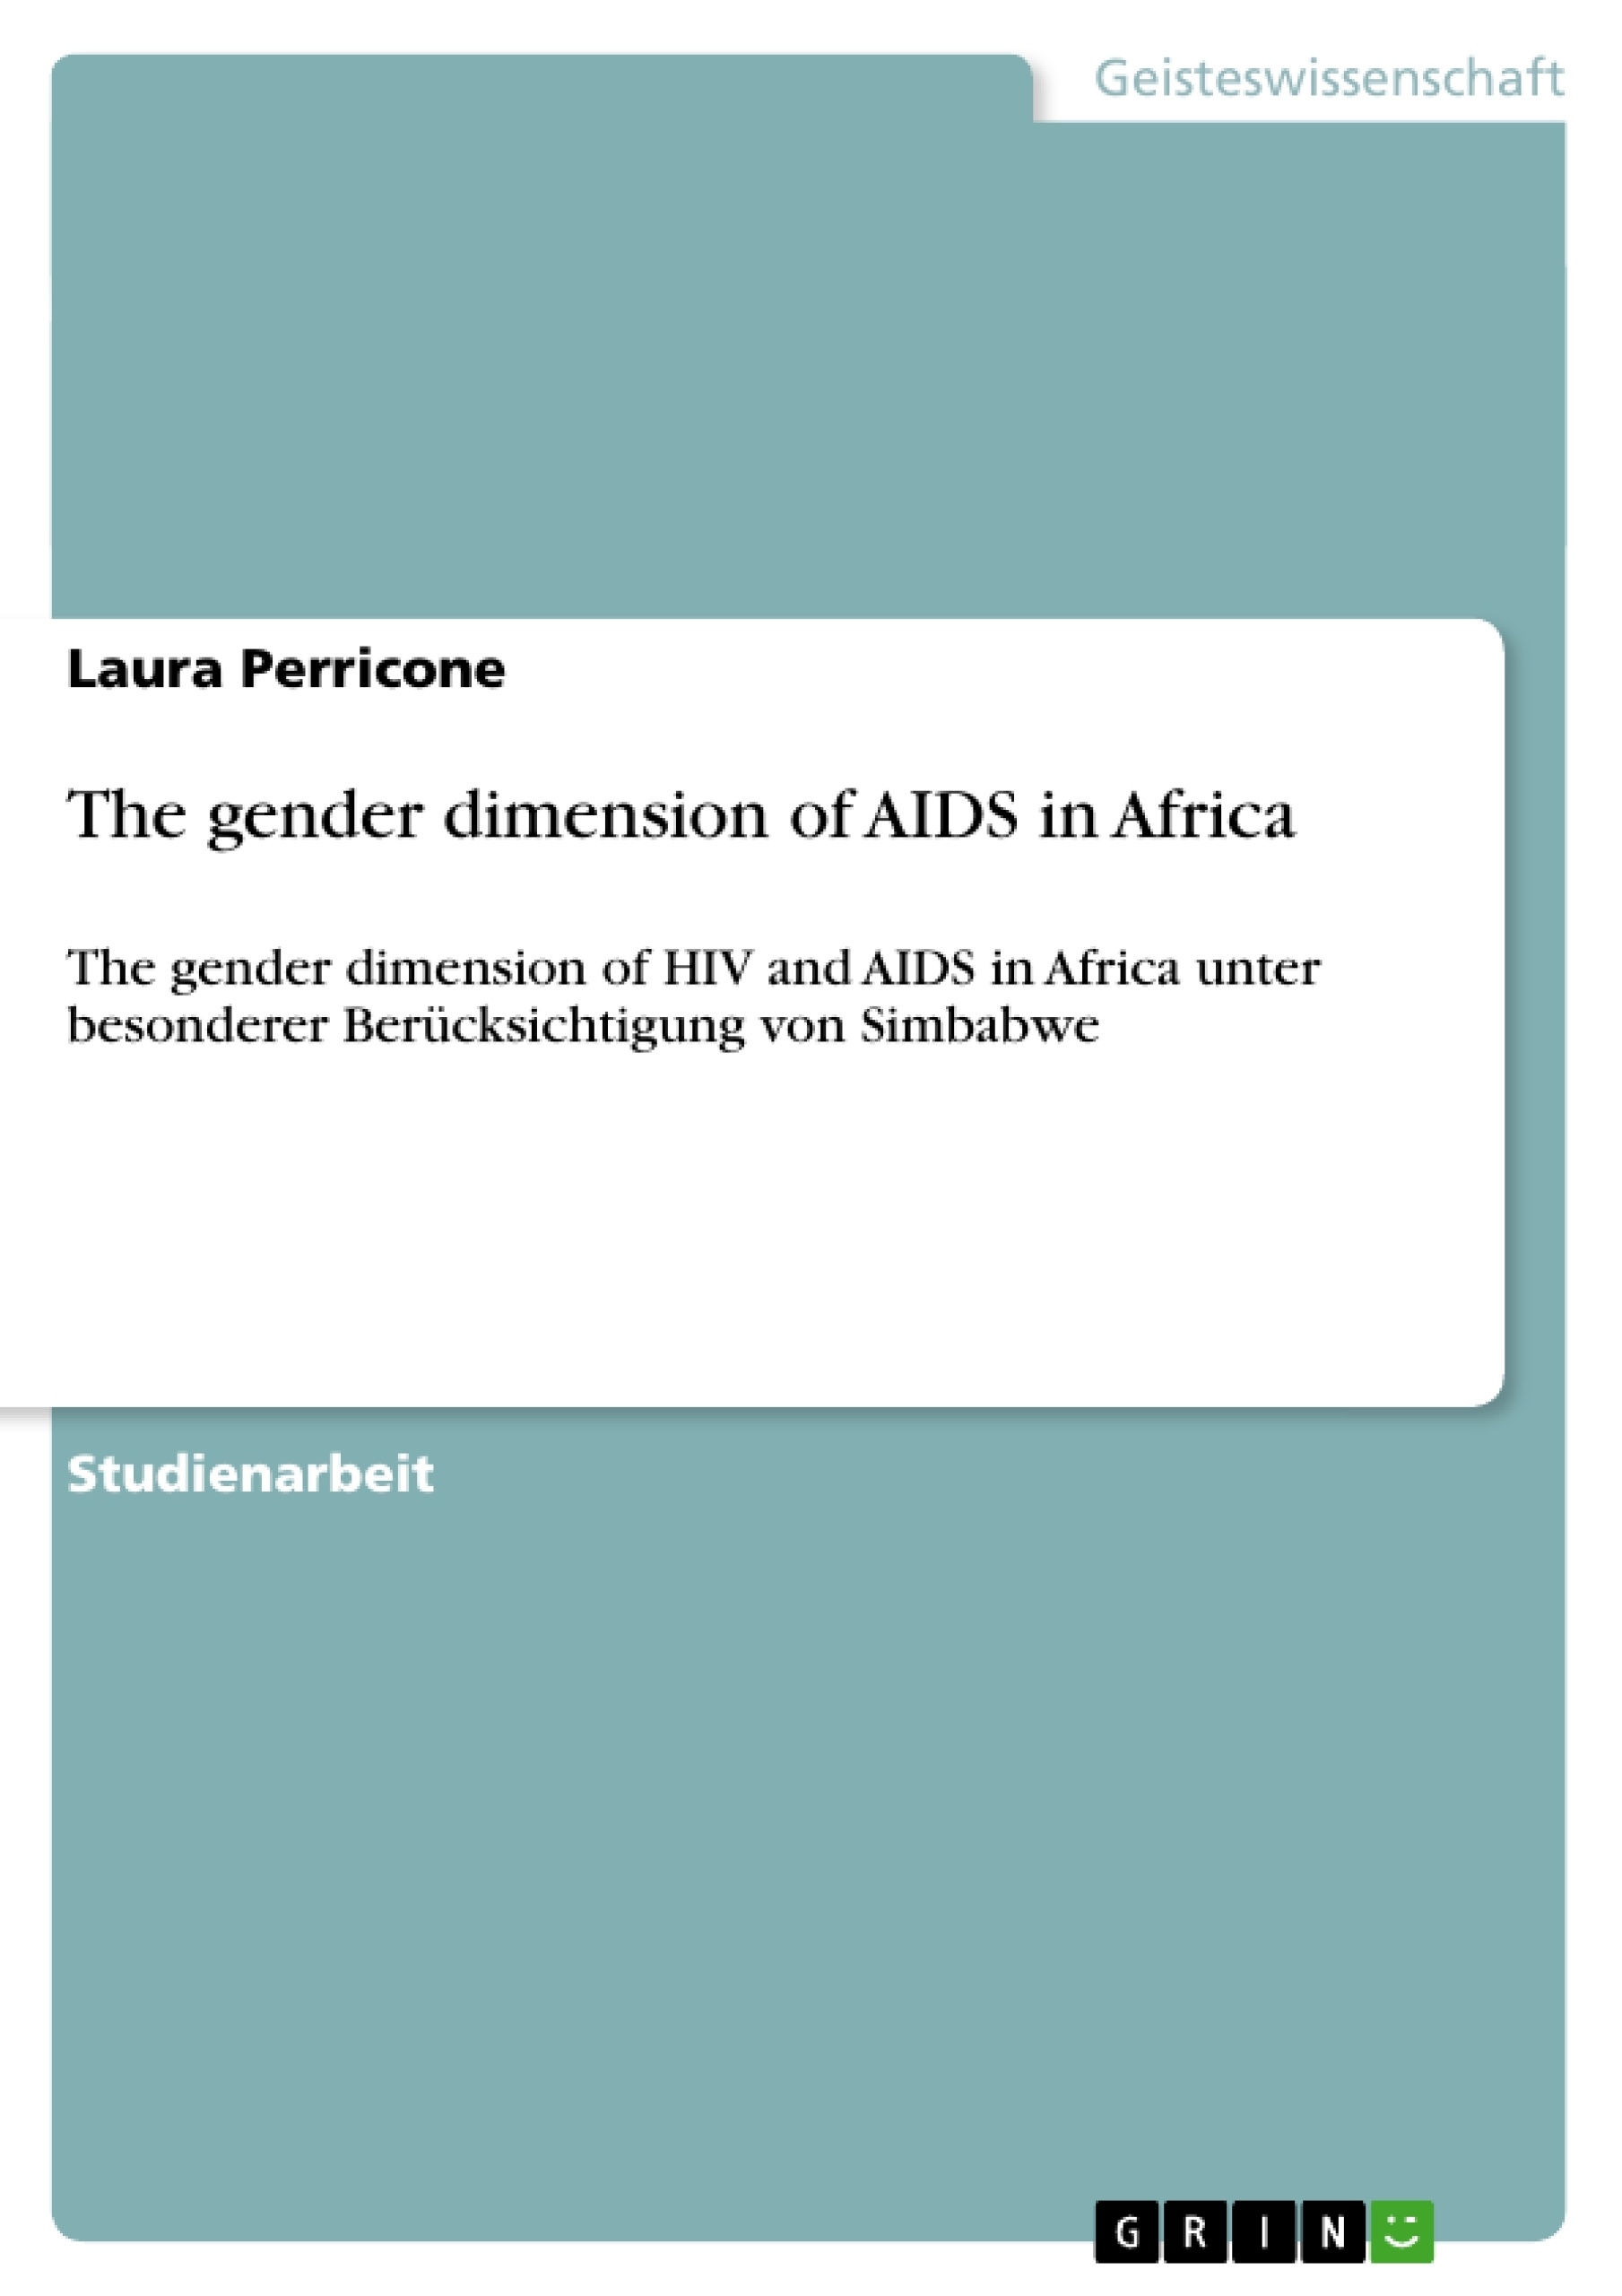 Título: The gender dimension of AIDS in Africa